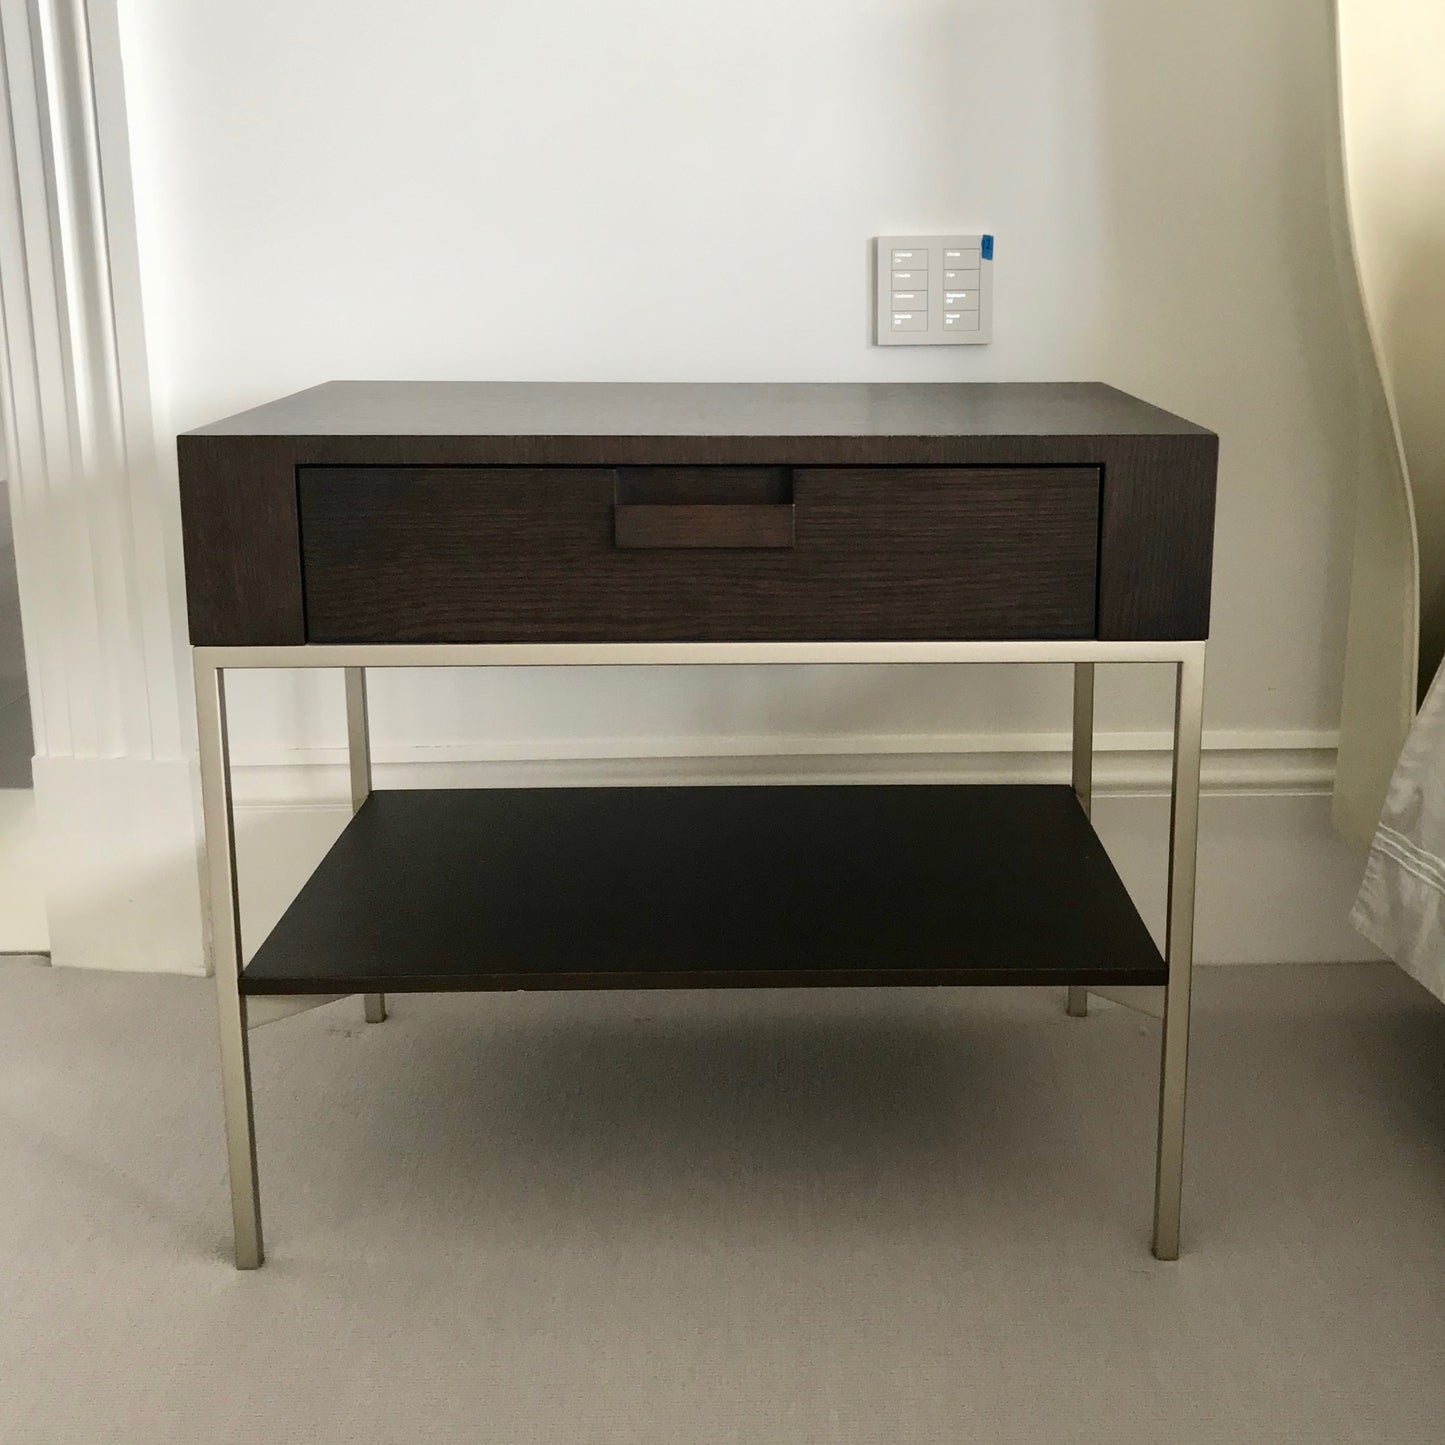 Load image into Gallery viewer, PAIR of Ebe [Apta Collection] Bedside Tables by Maxalto (B&amp;amp;B Italia)
